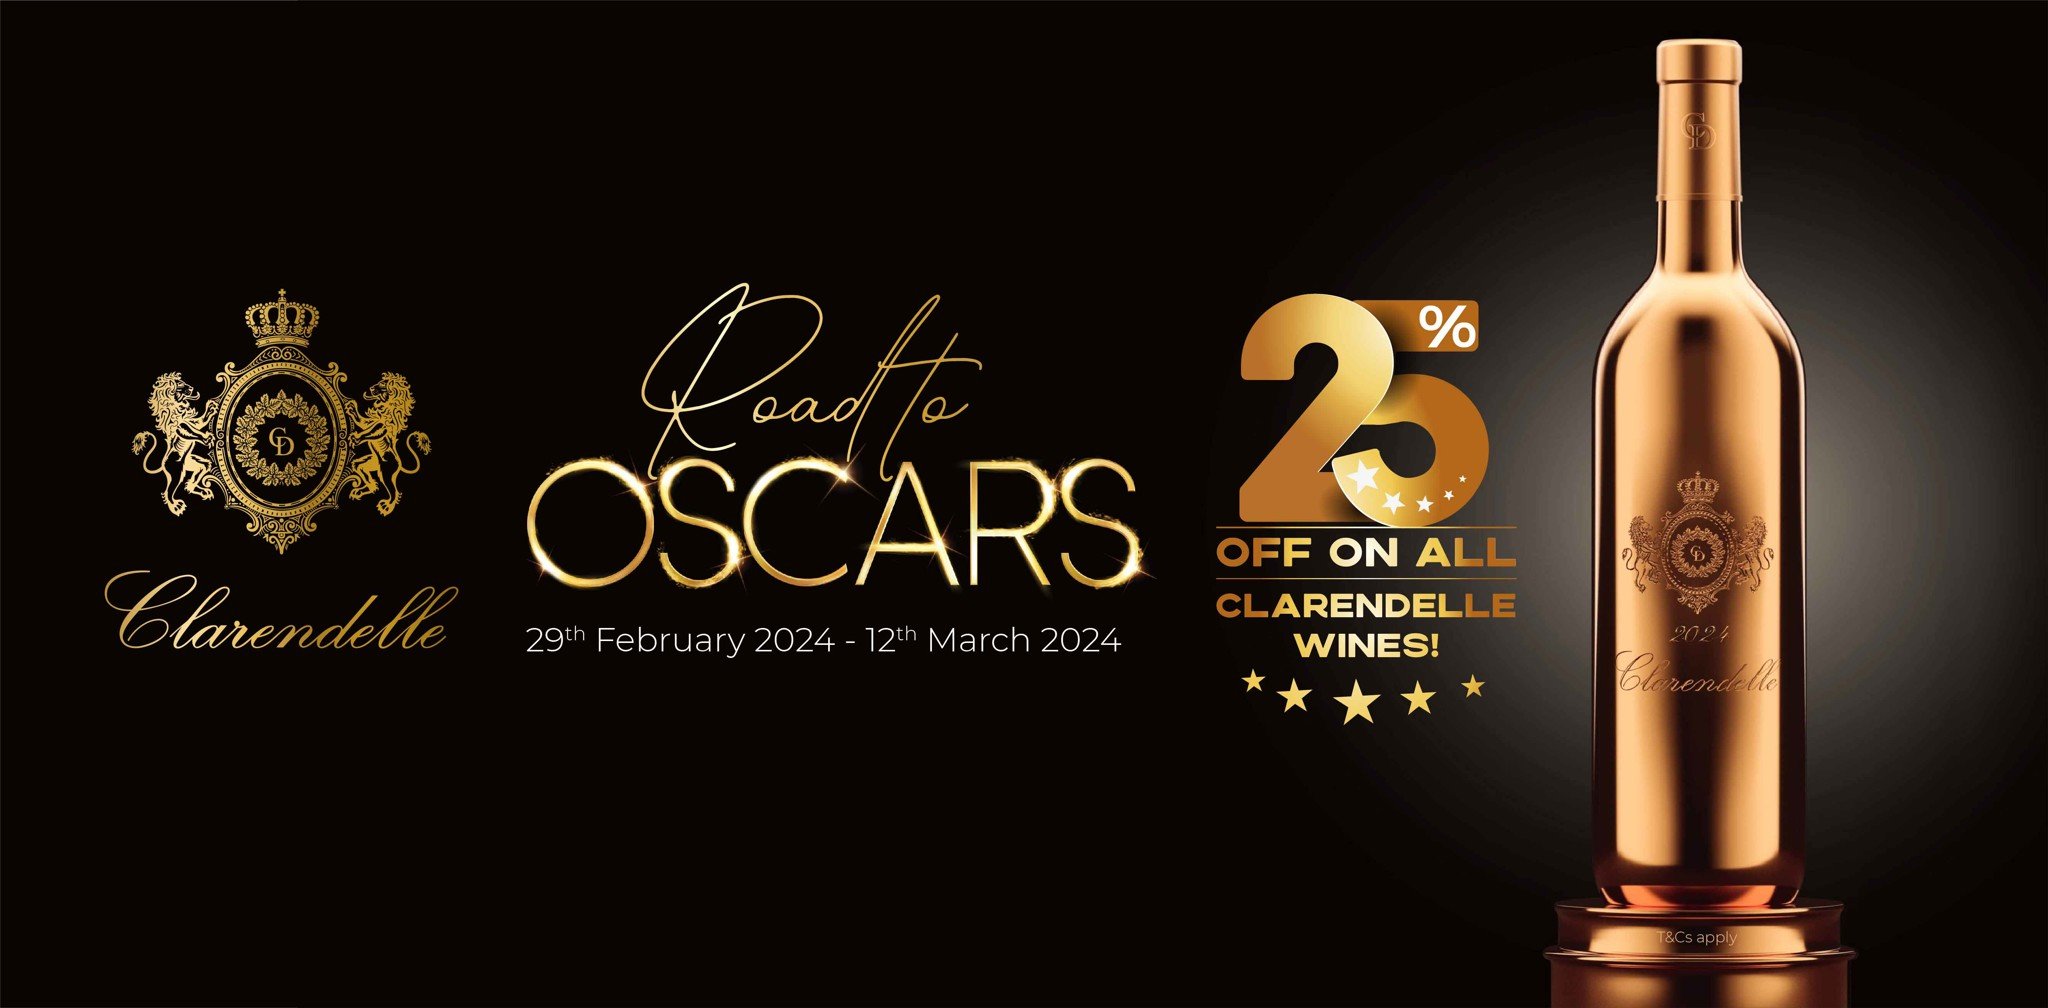 “ROAD TO OSCARS” WITH CLARENDELLE! ENJOY SPECIAL OFFER ON ALL CLARENDELLE WINES